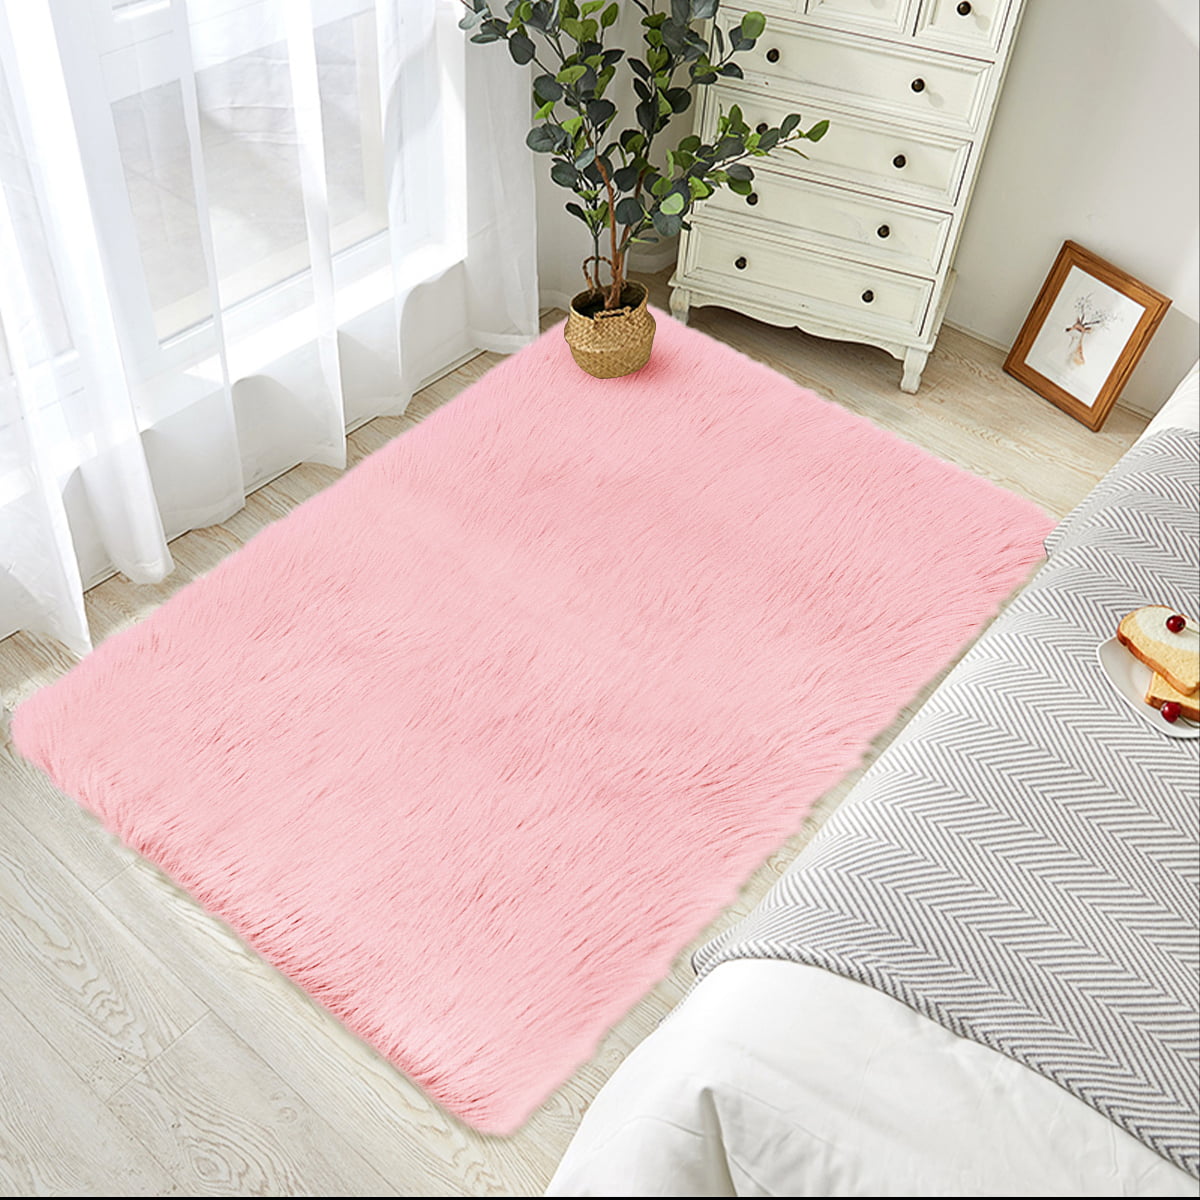 Large Fluffy Plain Sheepskin Soft Faux Fur Shaggy Area Rugs Room Mats Thick Wool 